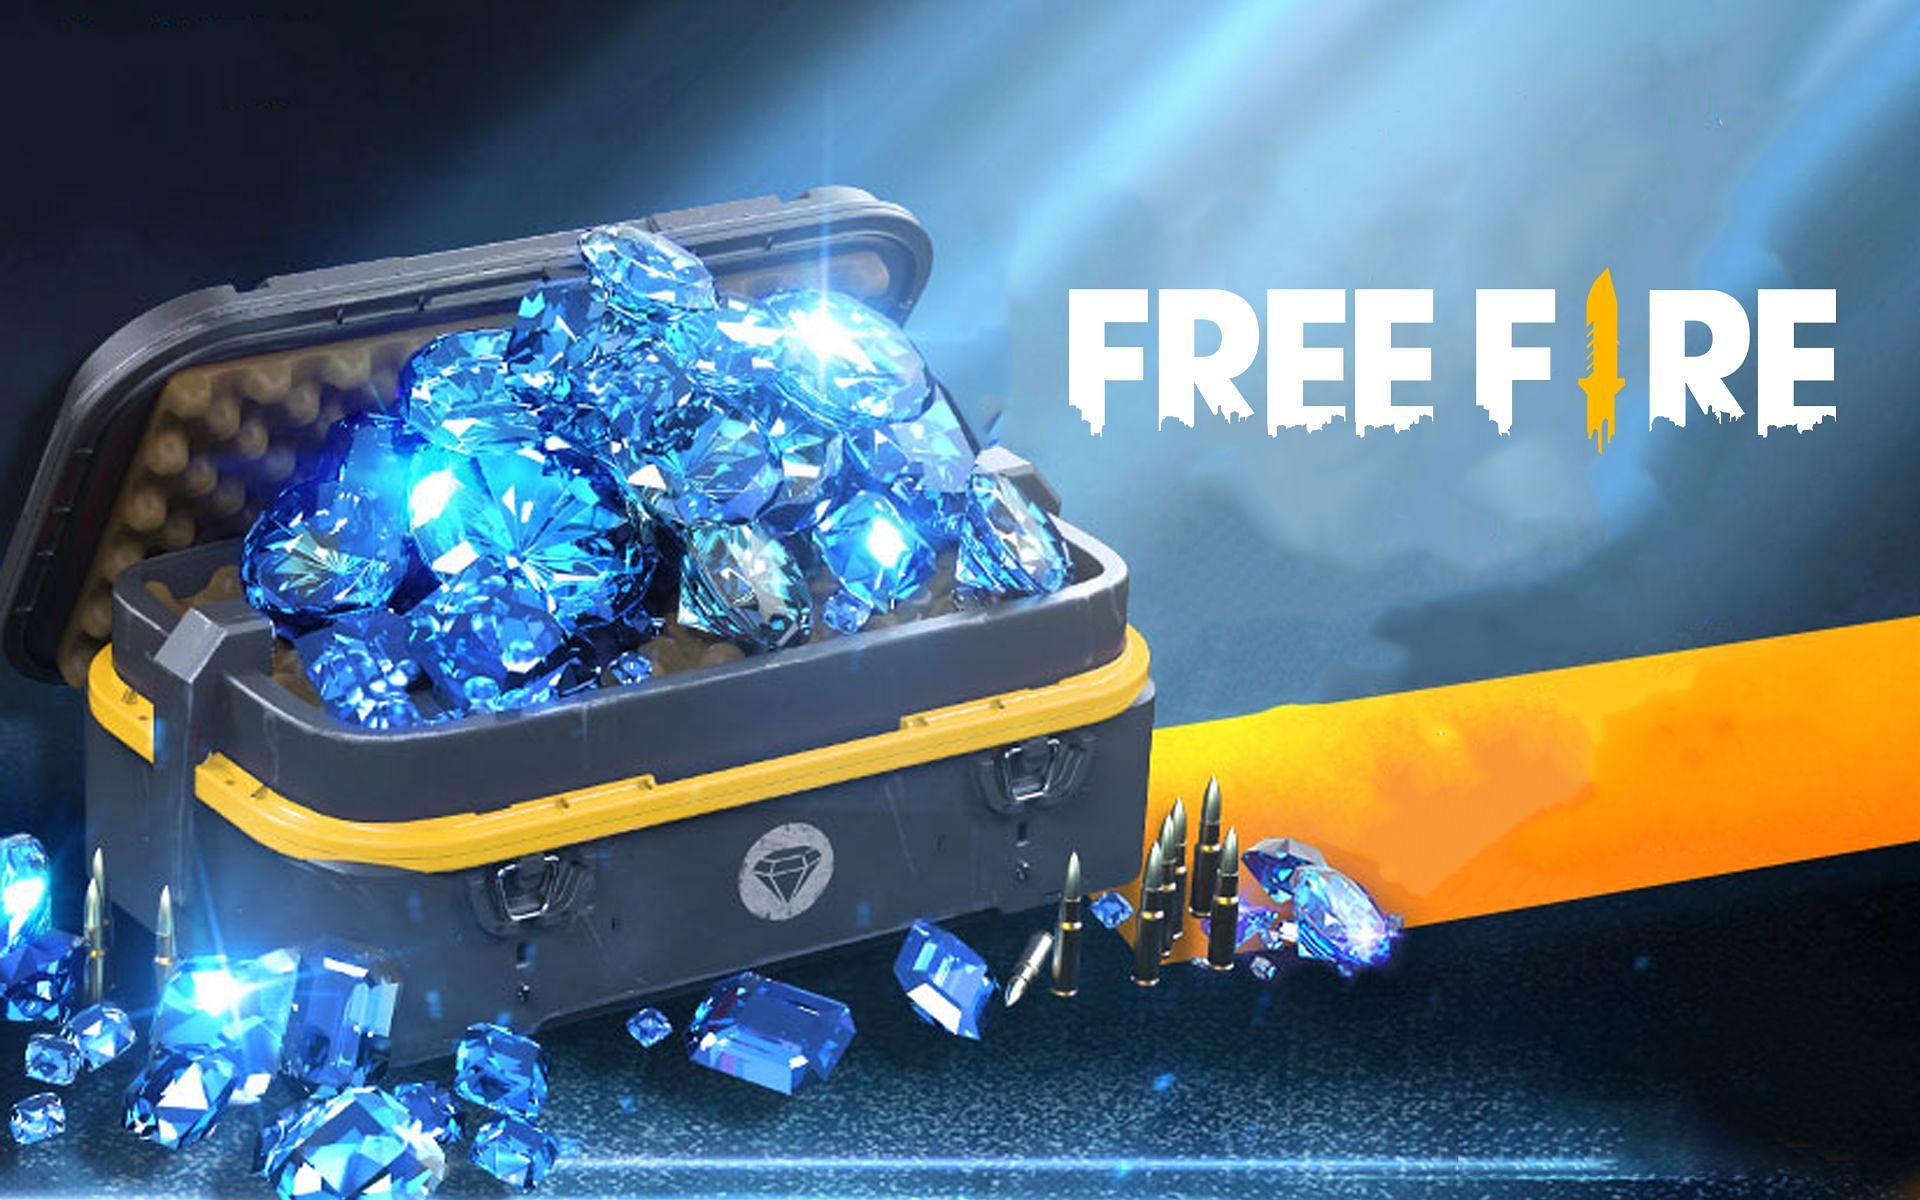 Diamonds have to be purchased by players using real money in Garena Free Fire (Image via Sportskeeda)